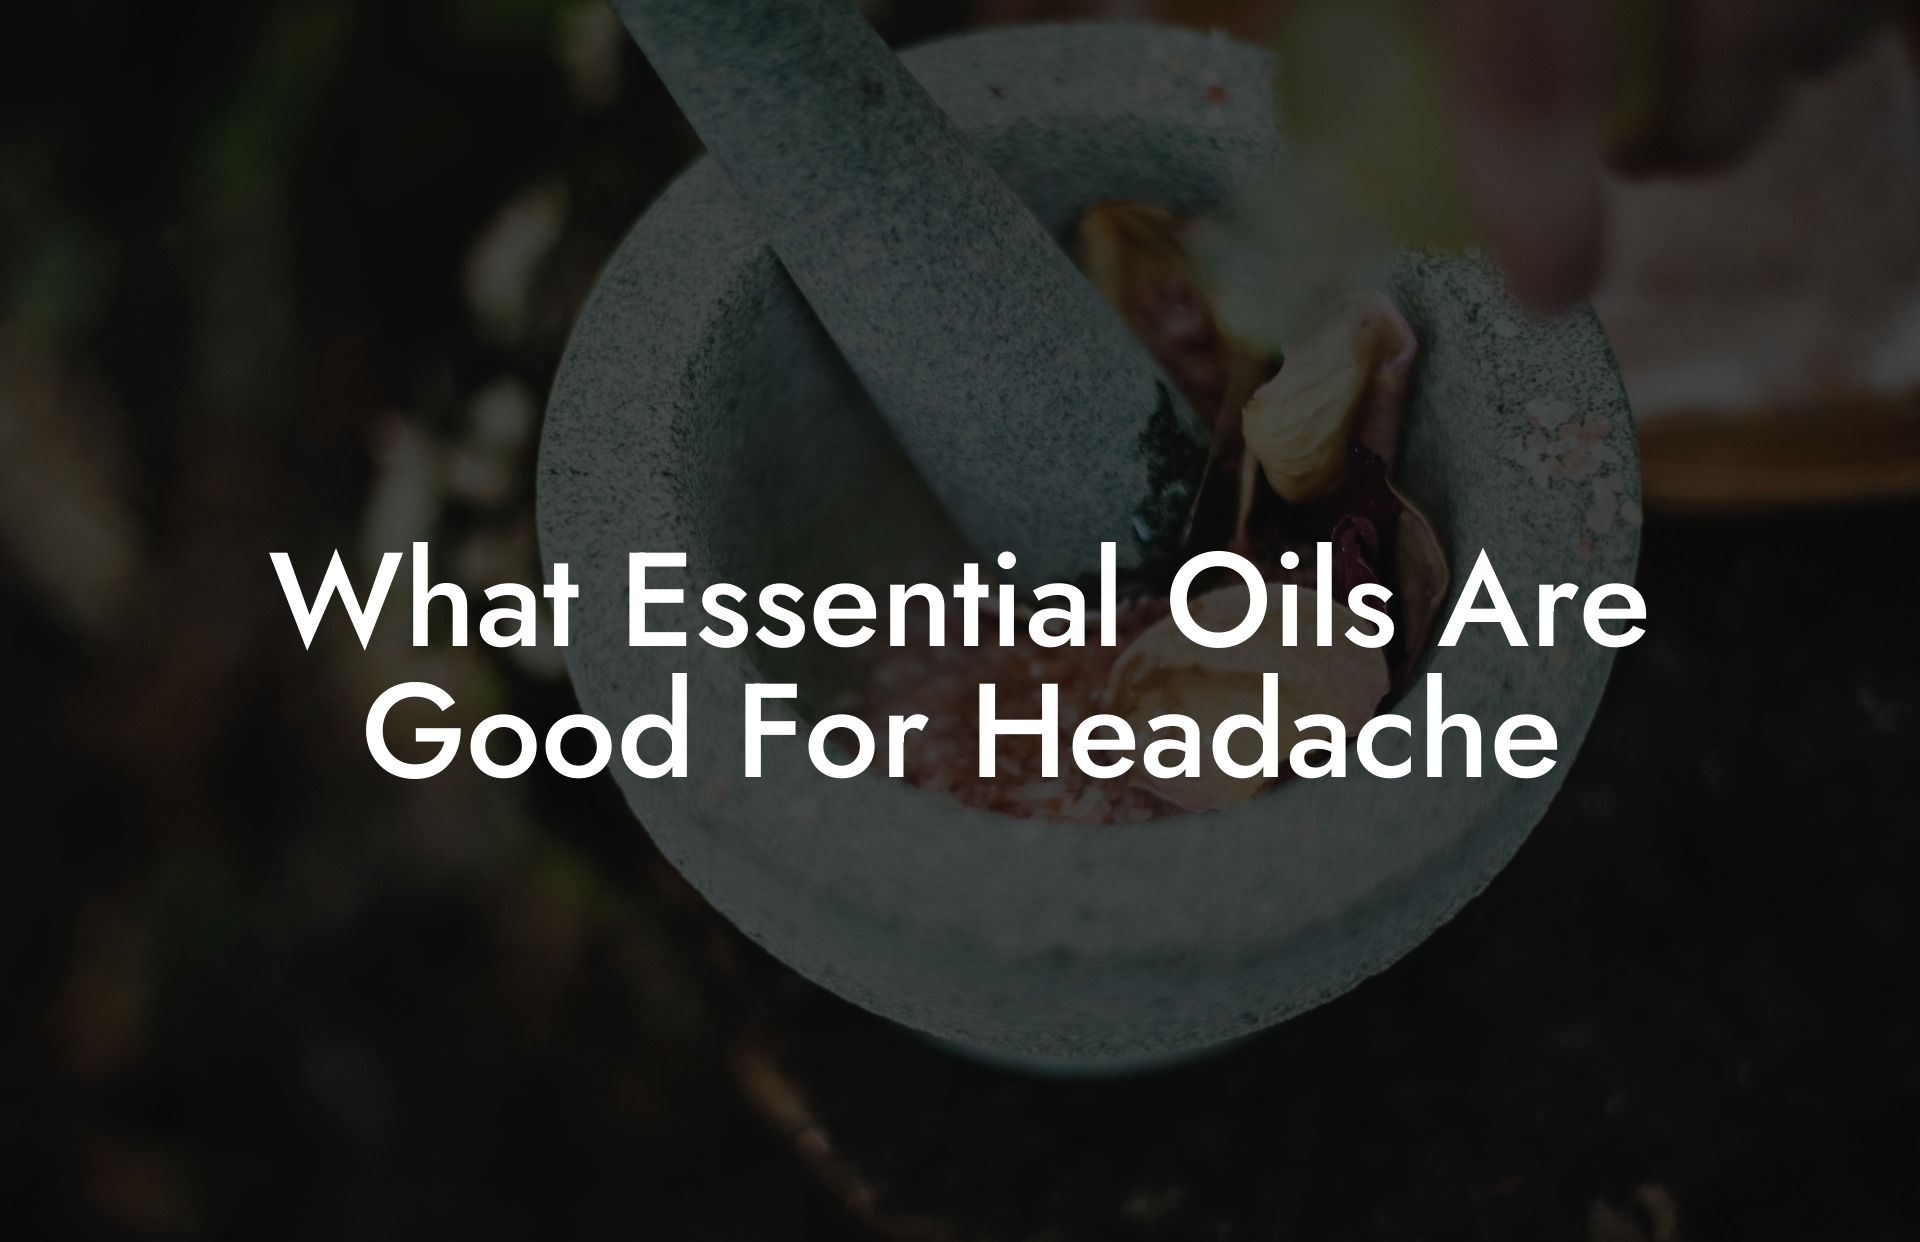 What Essential Oils Are Good For Headache